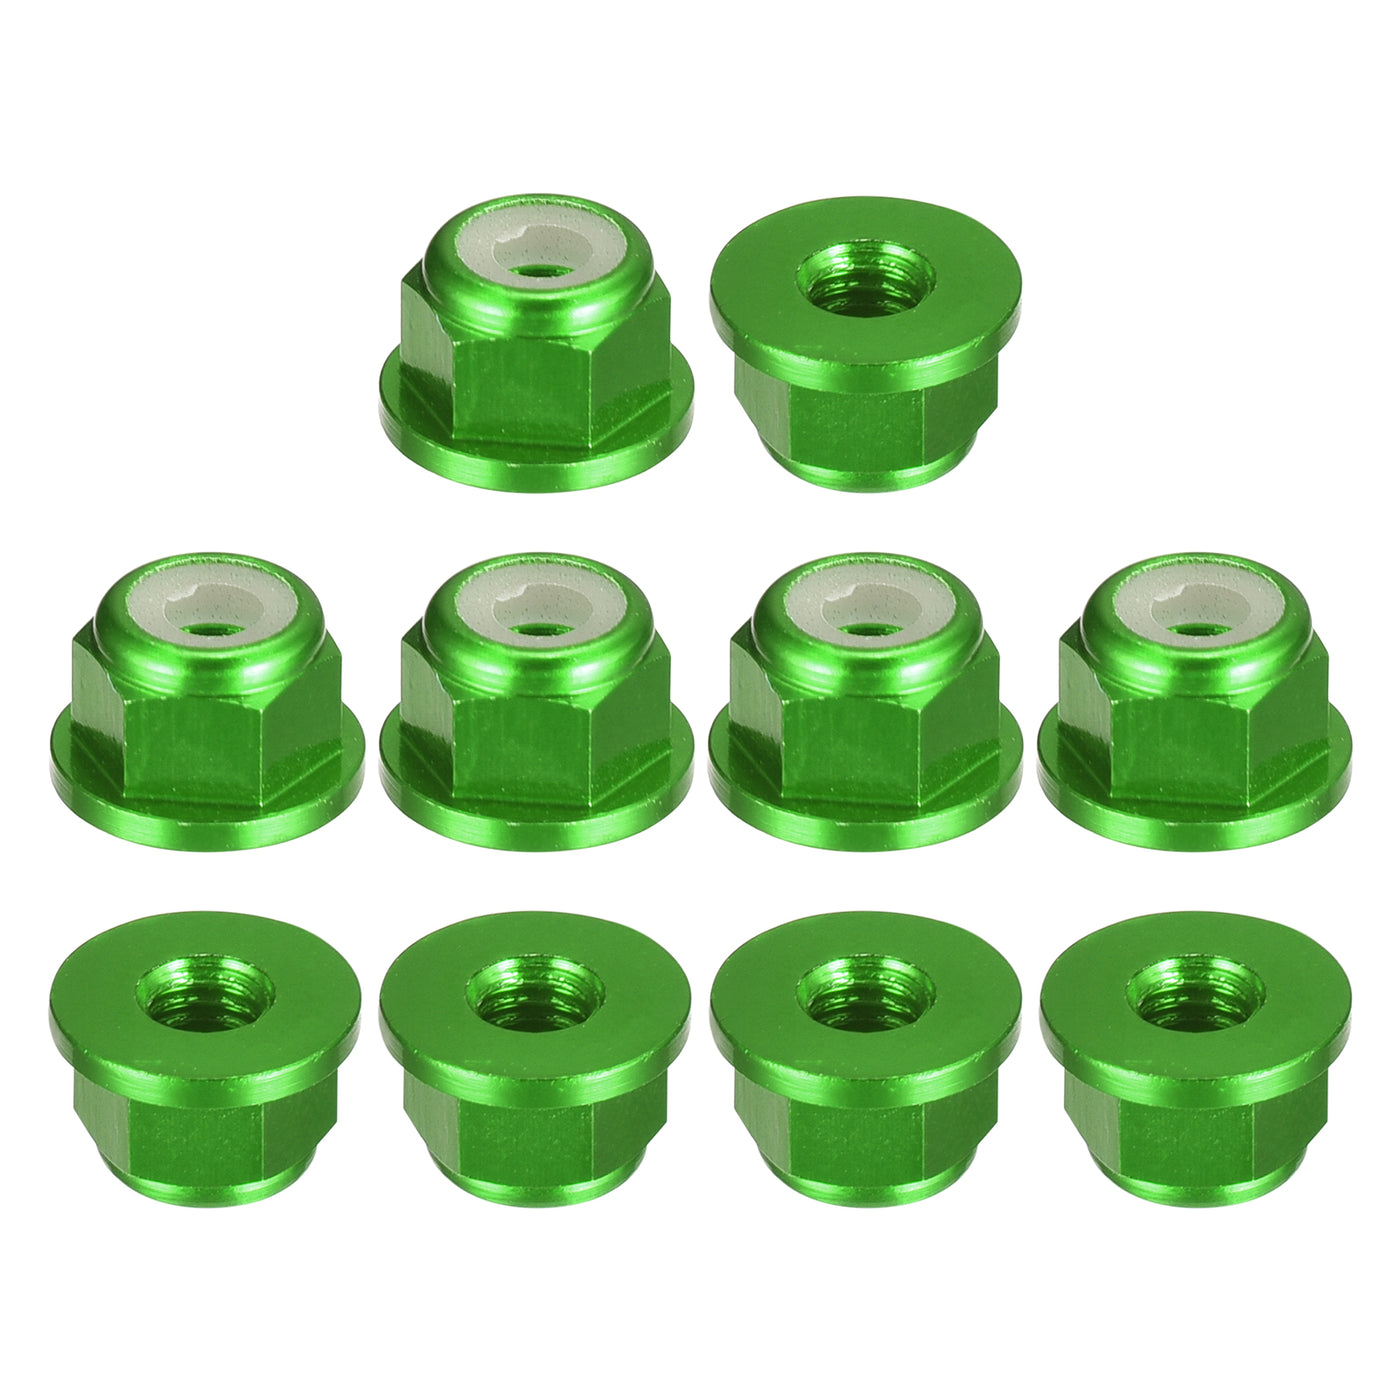 uxcell Uxcell Nylon Insert Hex Lock Nuts, 10pcs - M3 x 0.5mm Aluminum Alloy Self-Locking Nut, Anodizing Flange Lock Nut for Fasteners (Green)